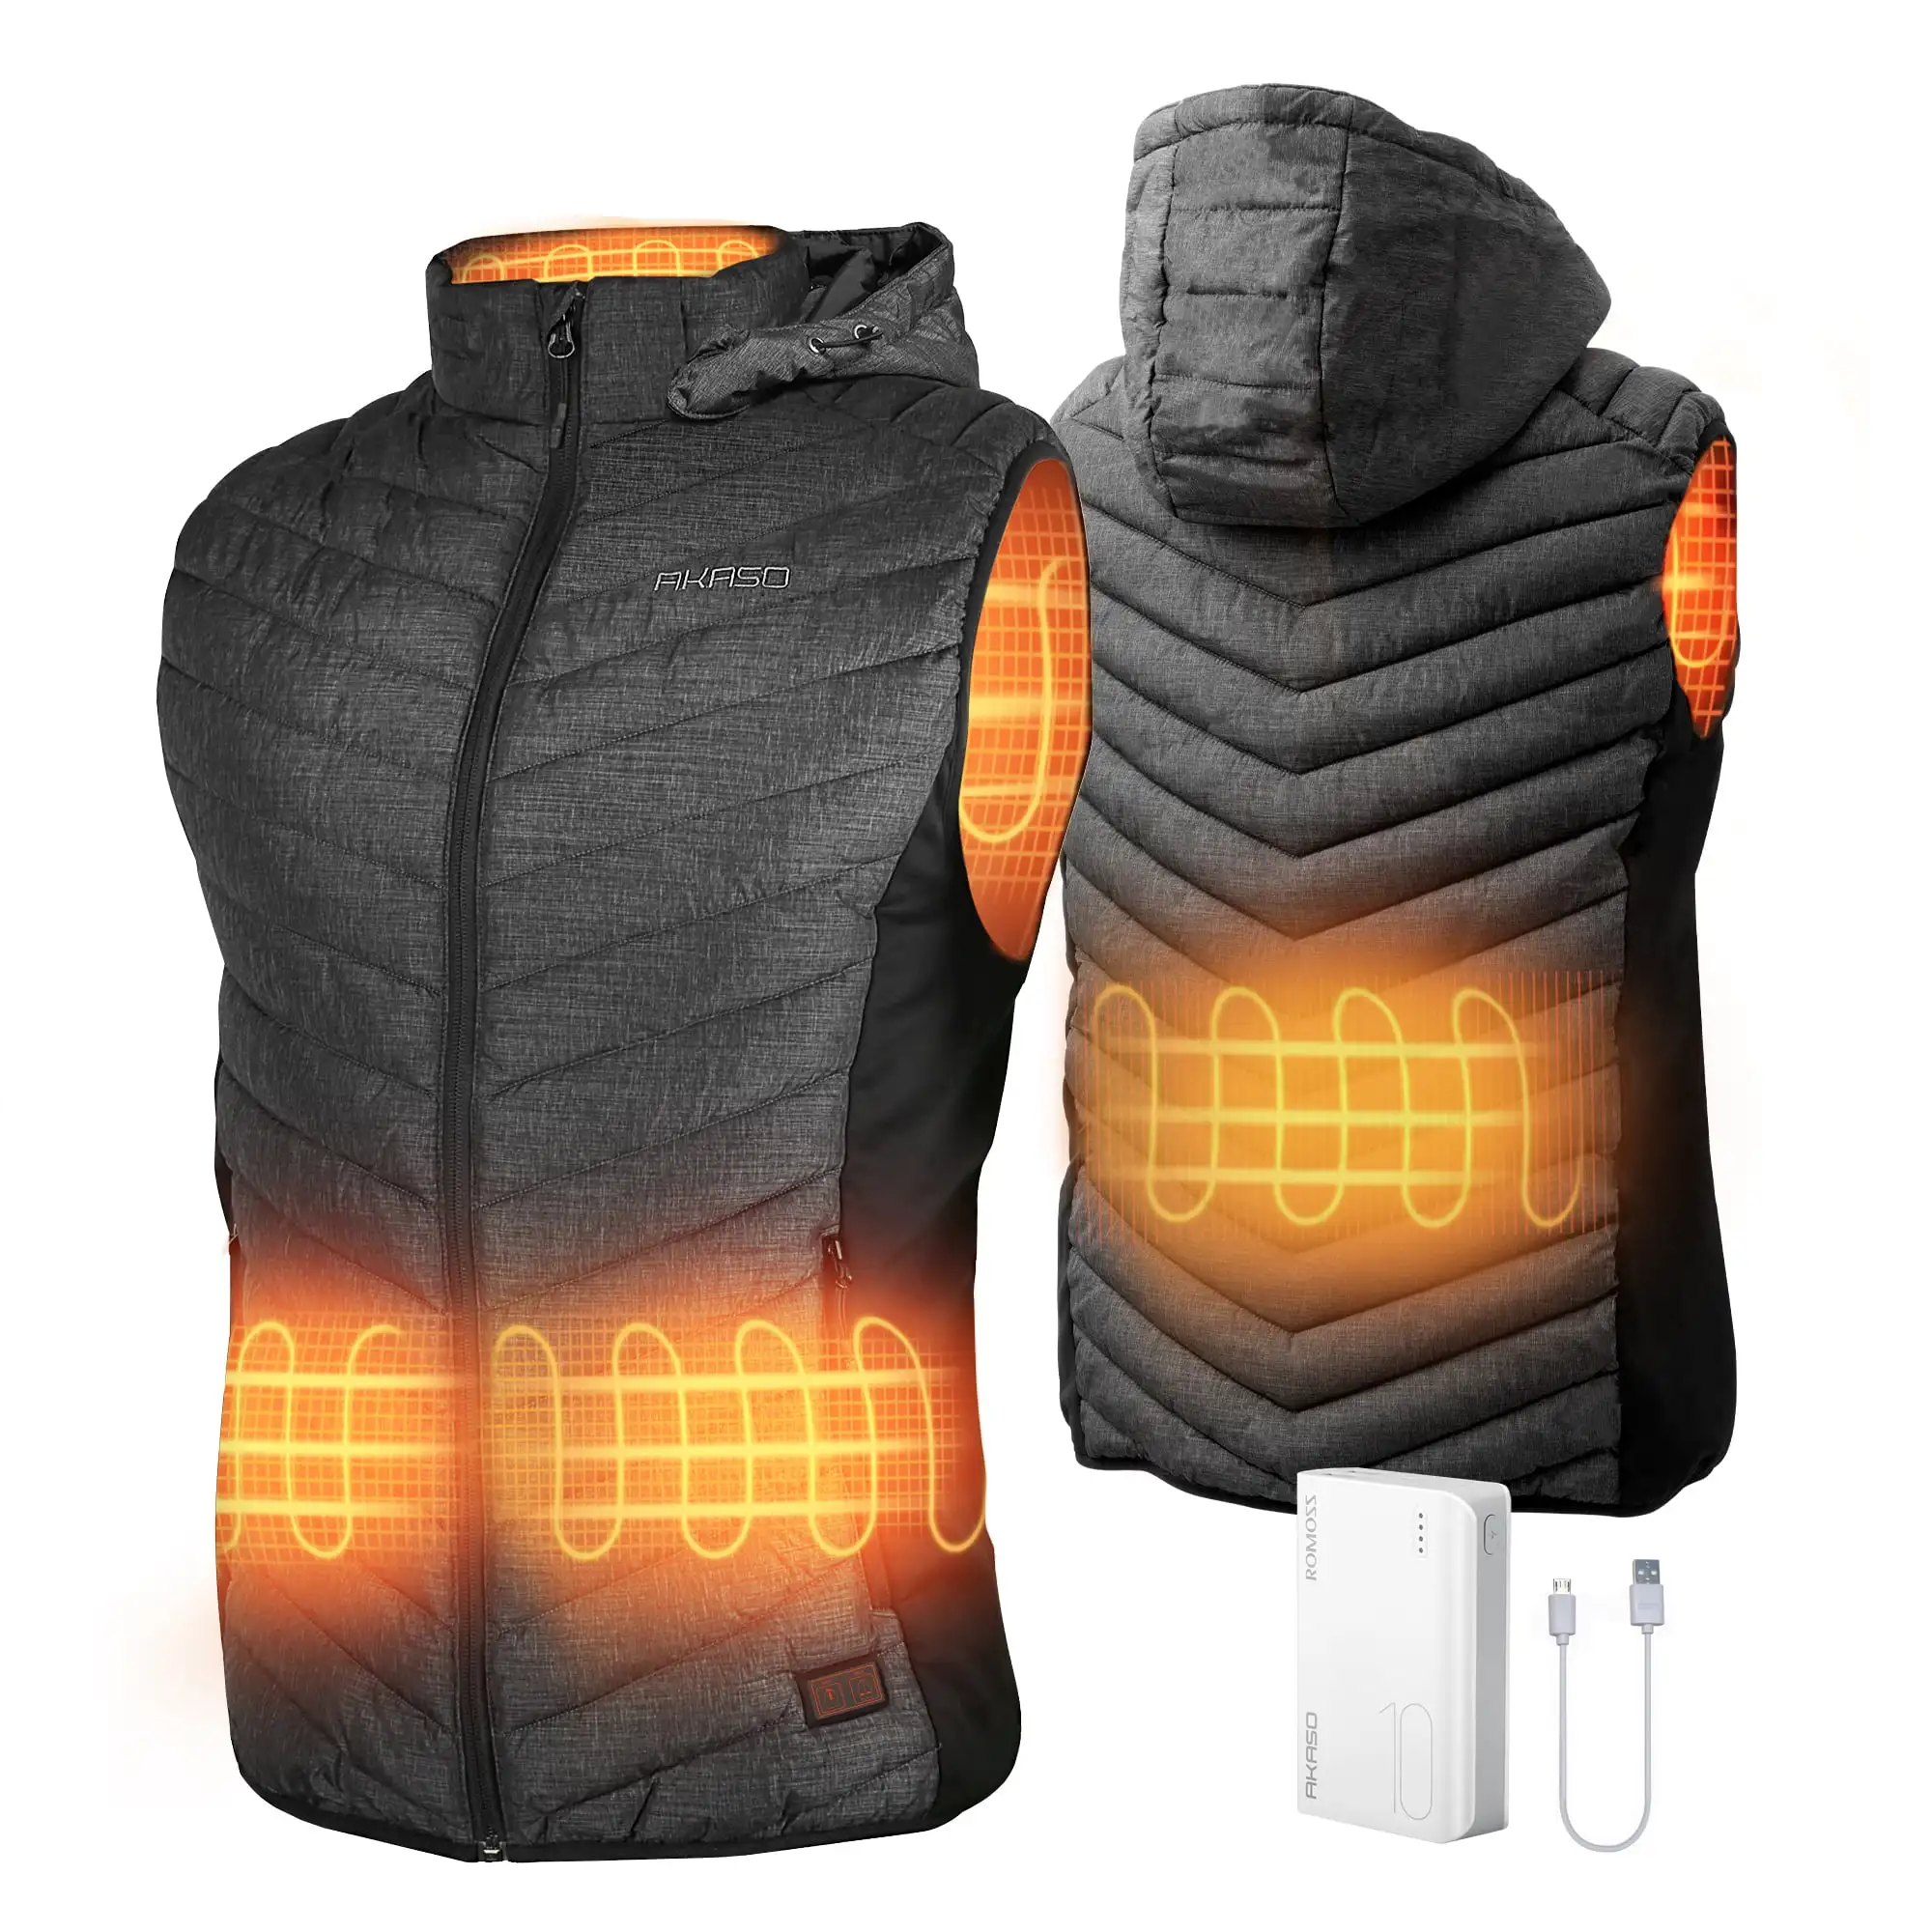 Heated Vest for Man, Lightweight USB Rechargeable Heated Vest with Battery Included